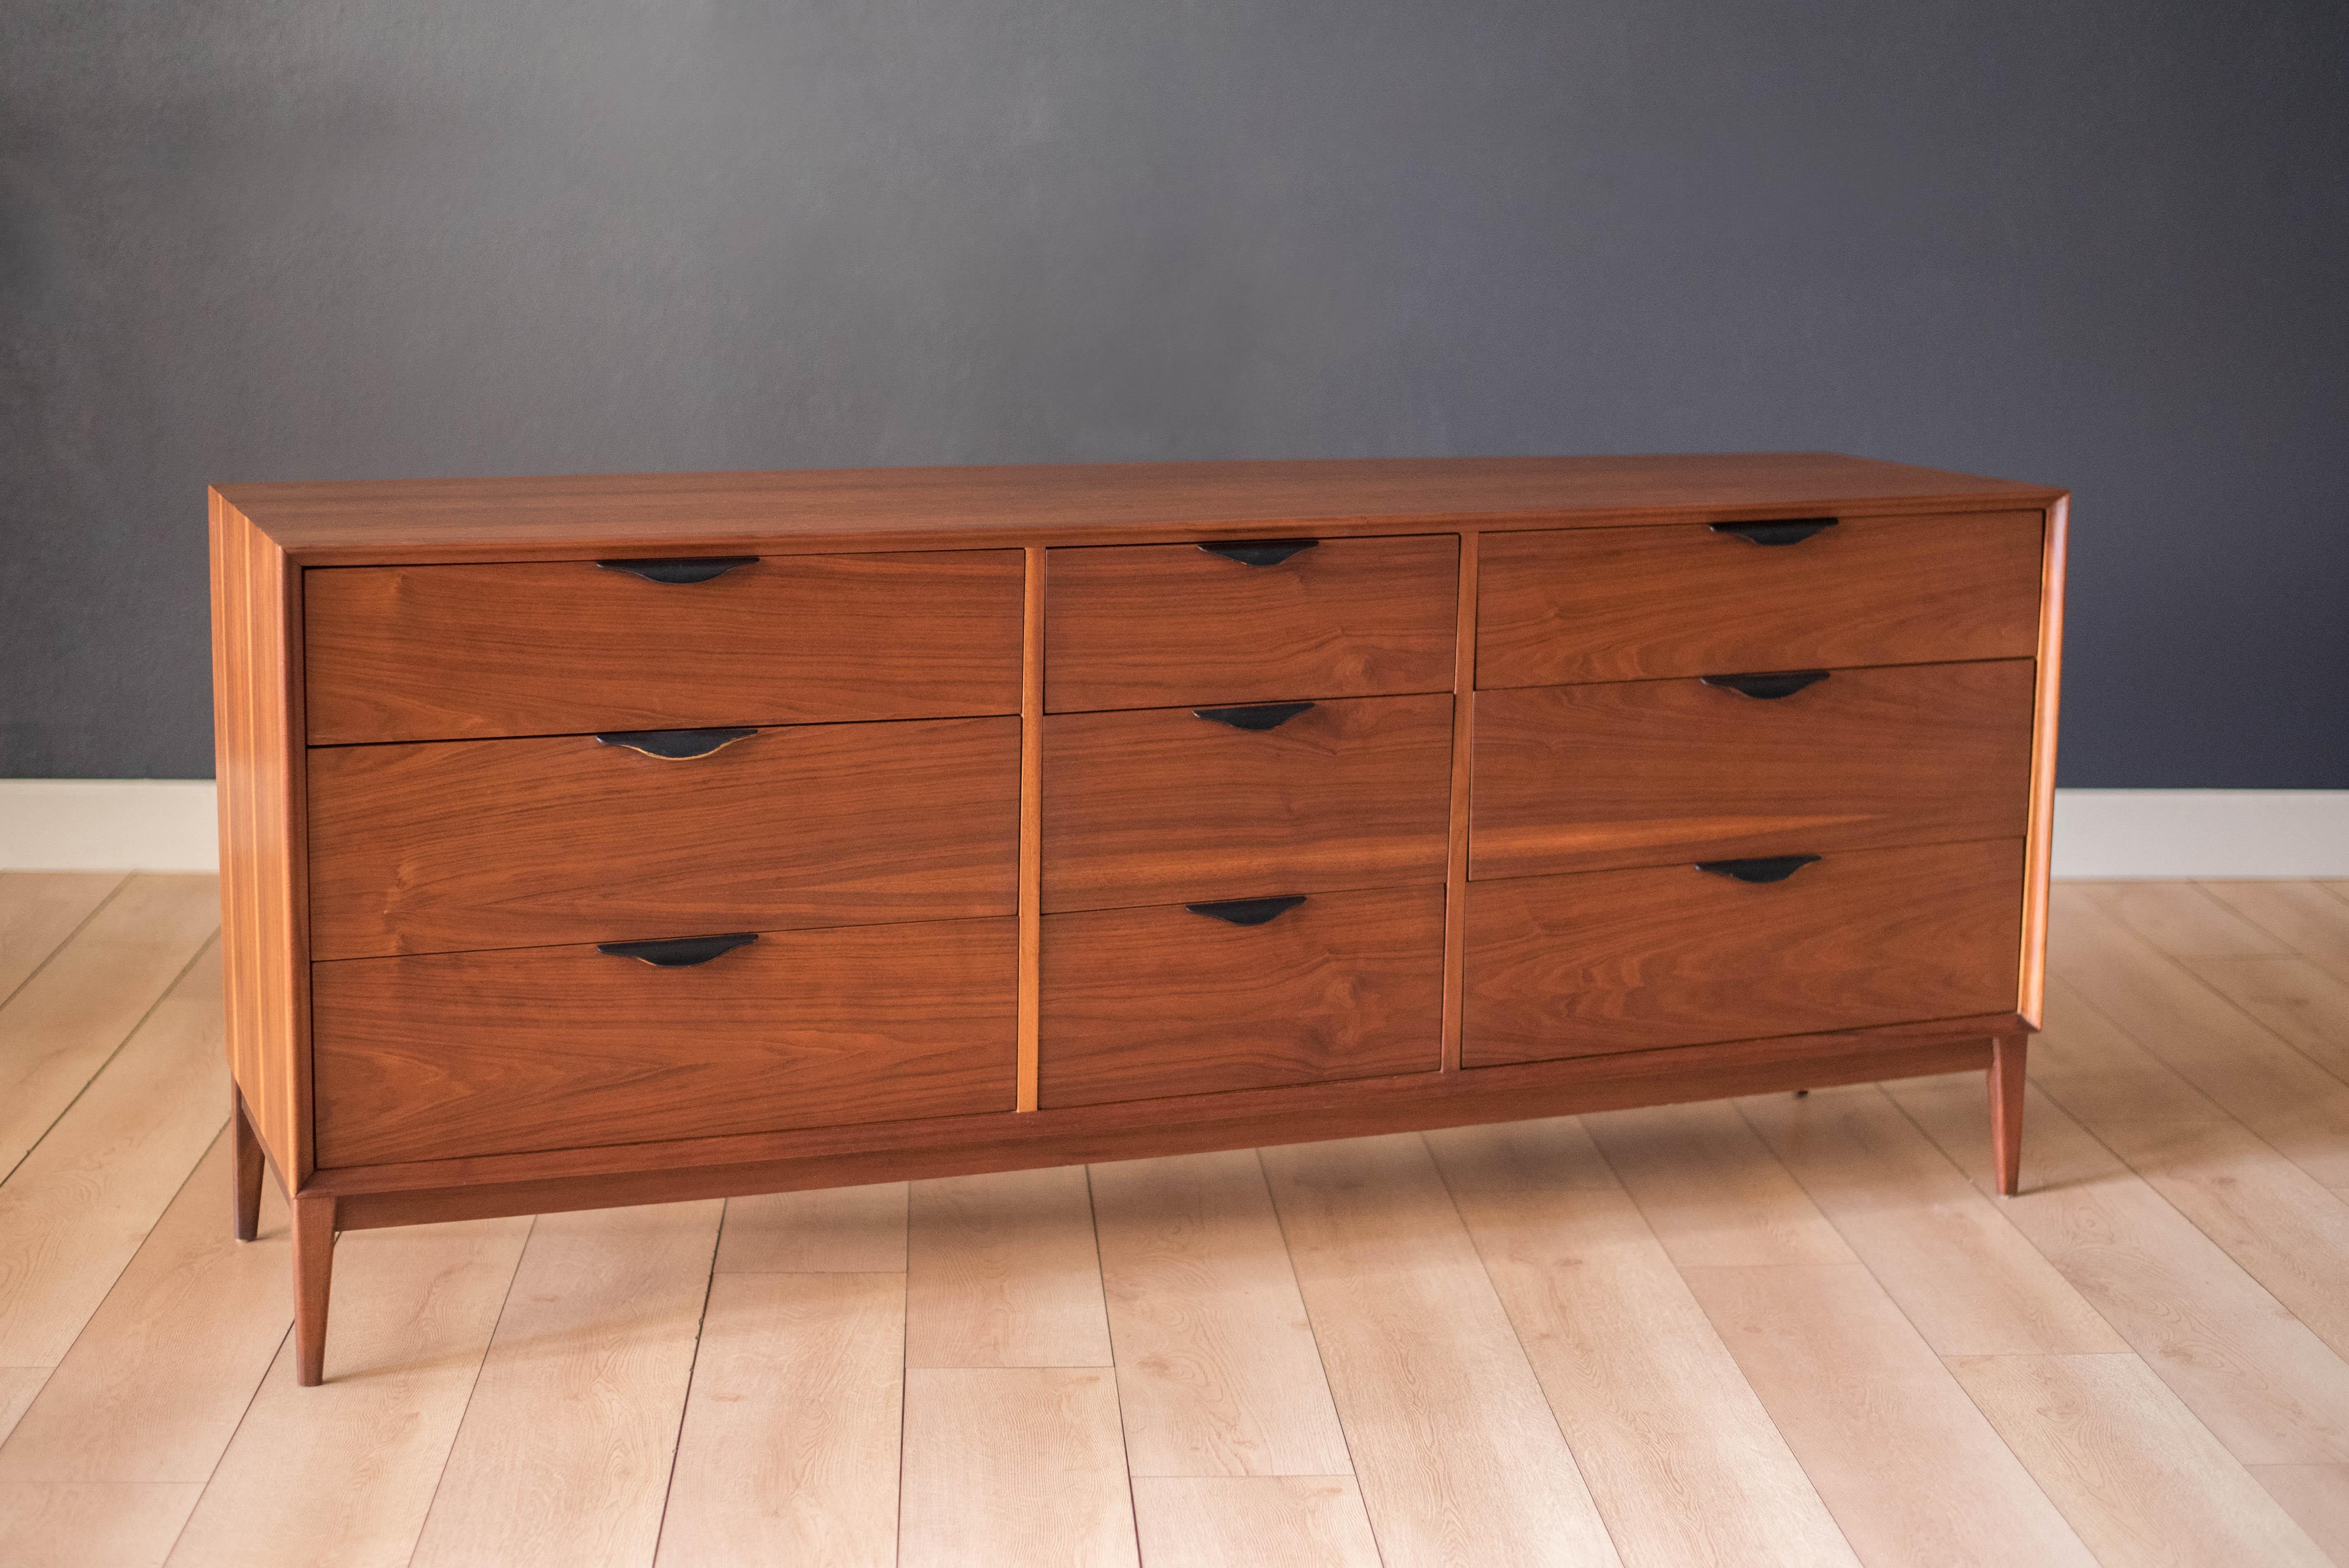 Midcentury dresser in walnut manufactured by Dillingham, circa 1960s. This piece includes nine spacious drawers of various sizes accessorized with sculpted ebonized wood pulls.